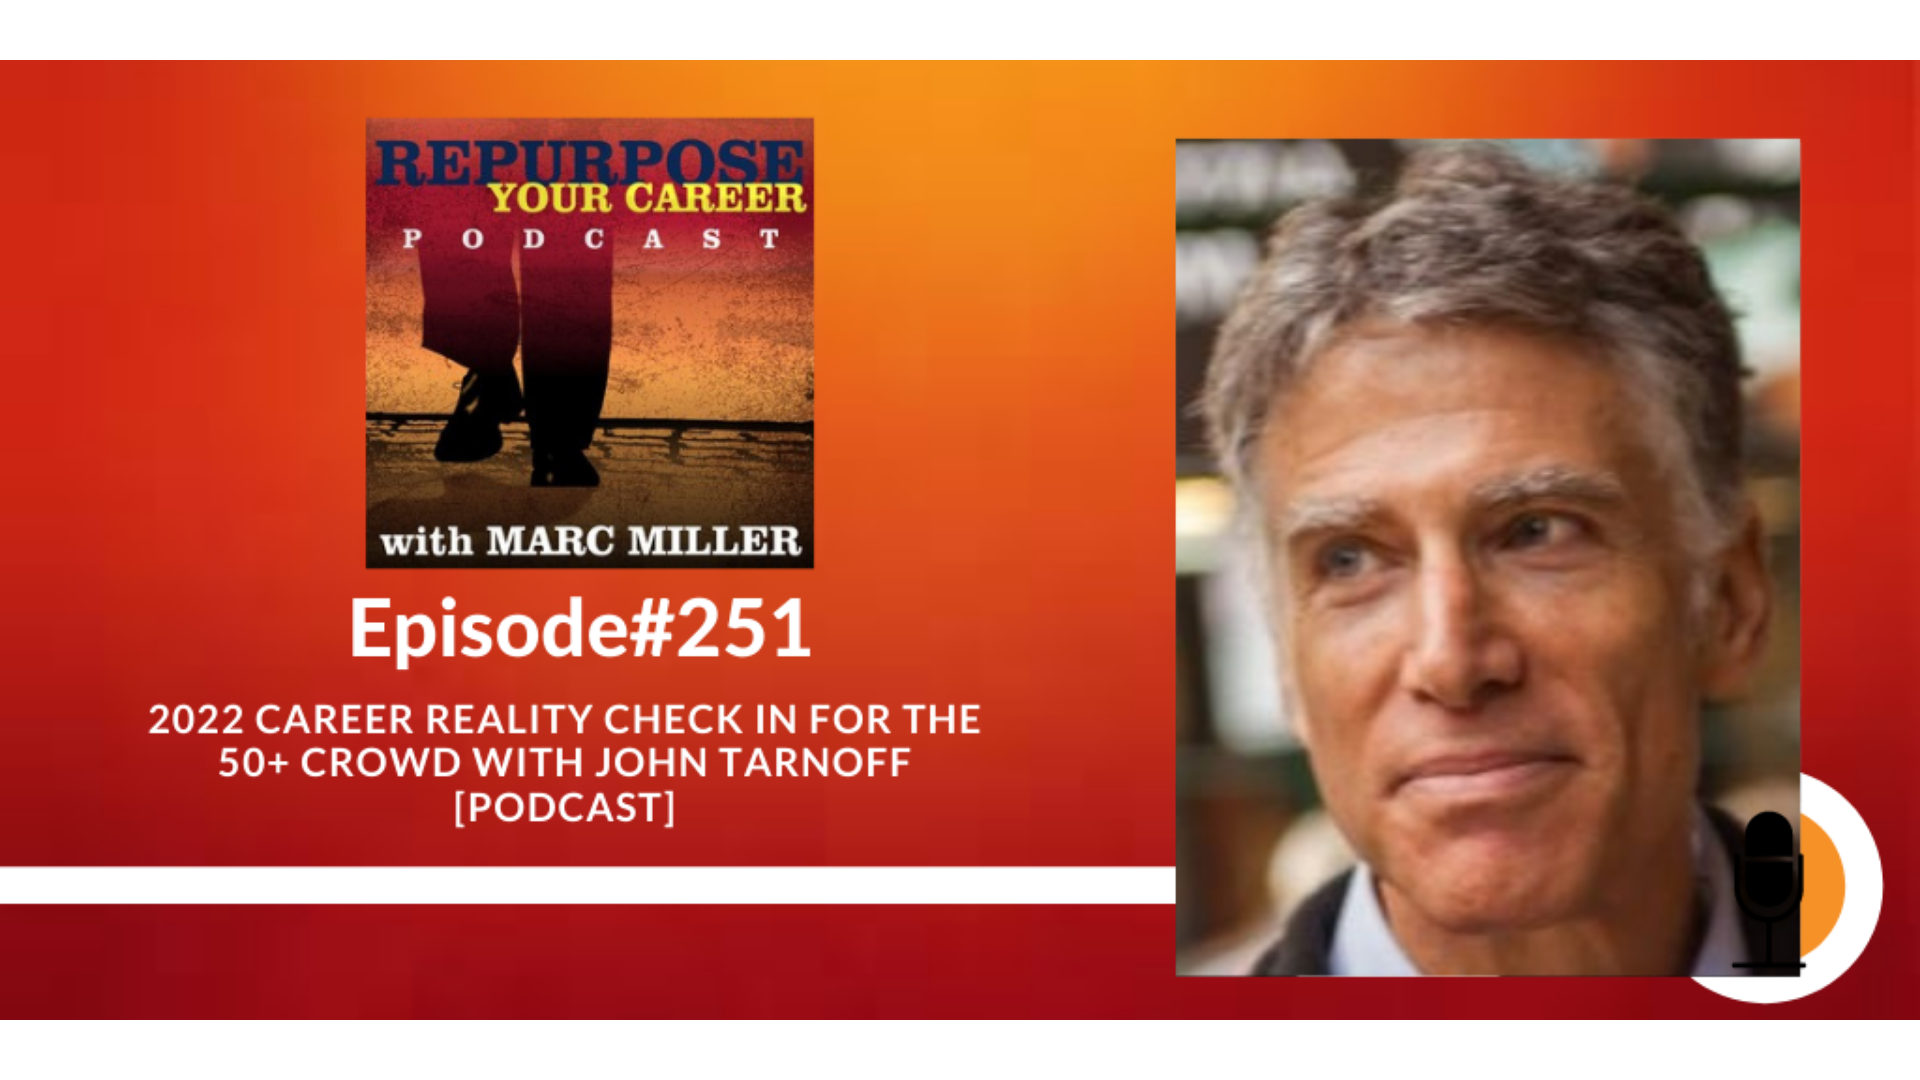 2022 Career Reality Check-In for the 50+ Crowd with John Tarnoff [Podcast]